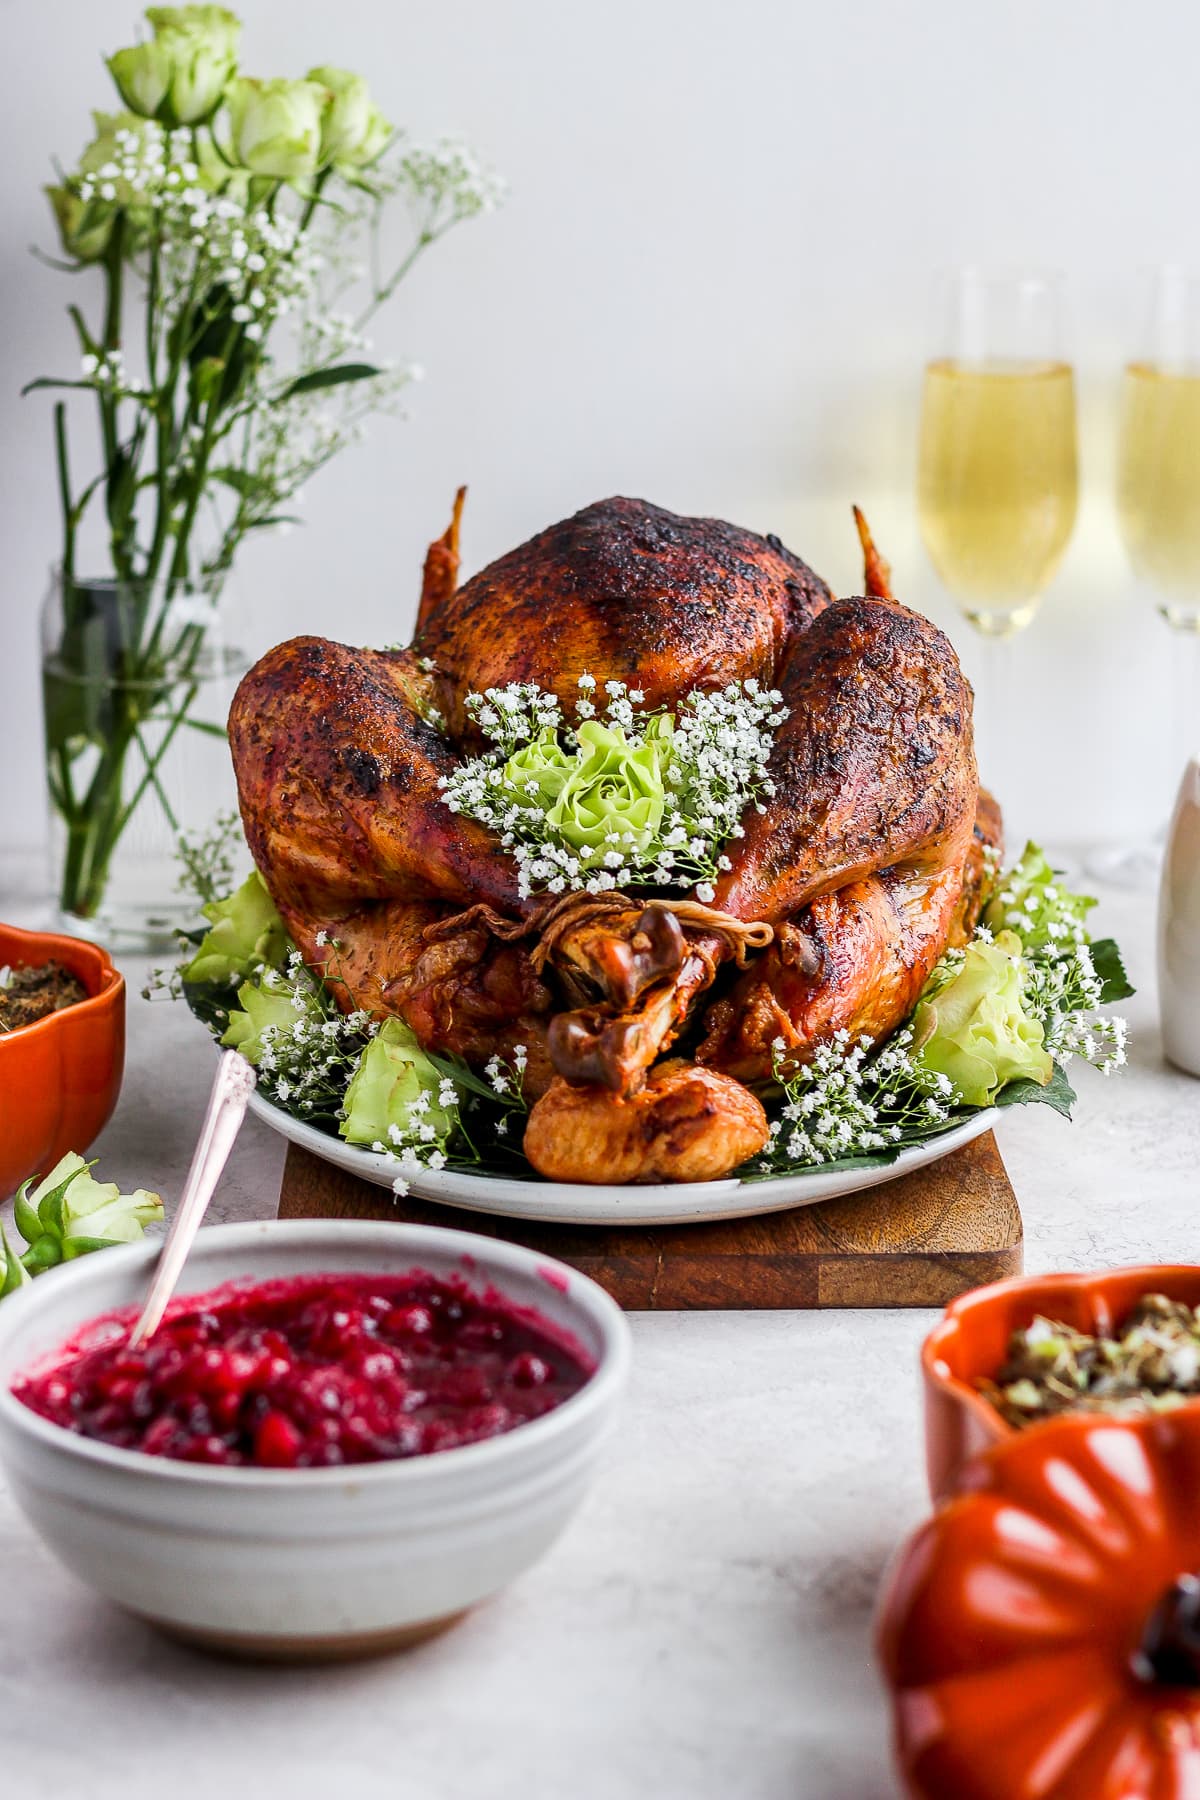 A roasted Thanksgiving turkey on a dinner table with side dishes.